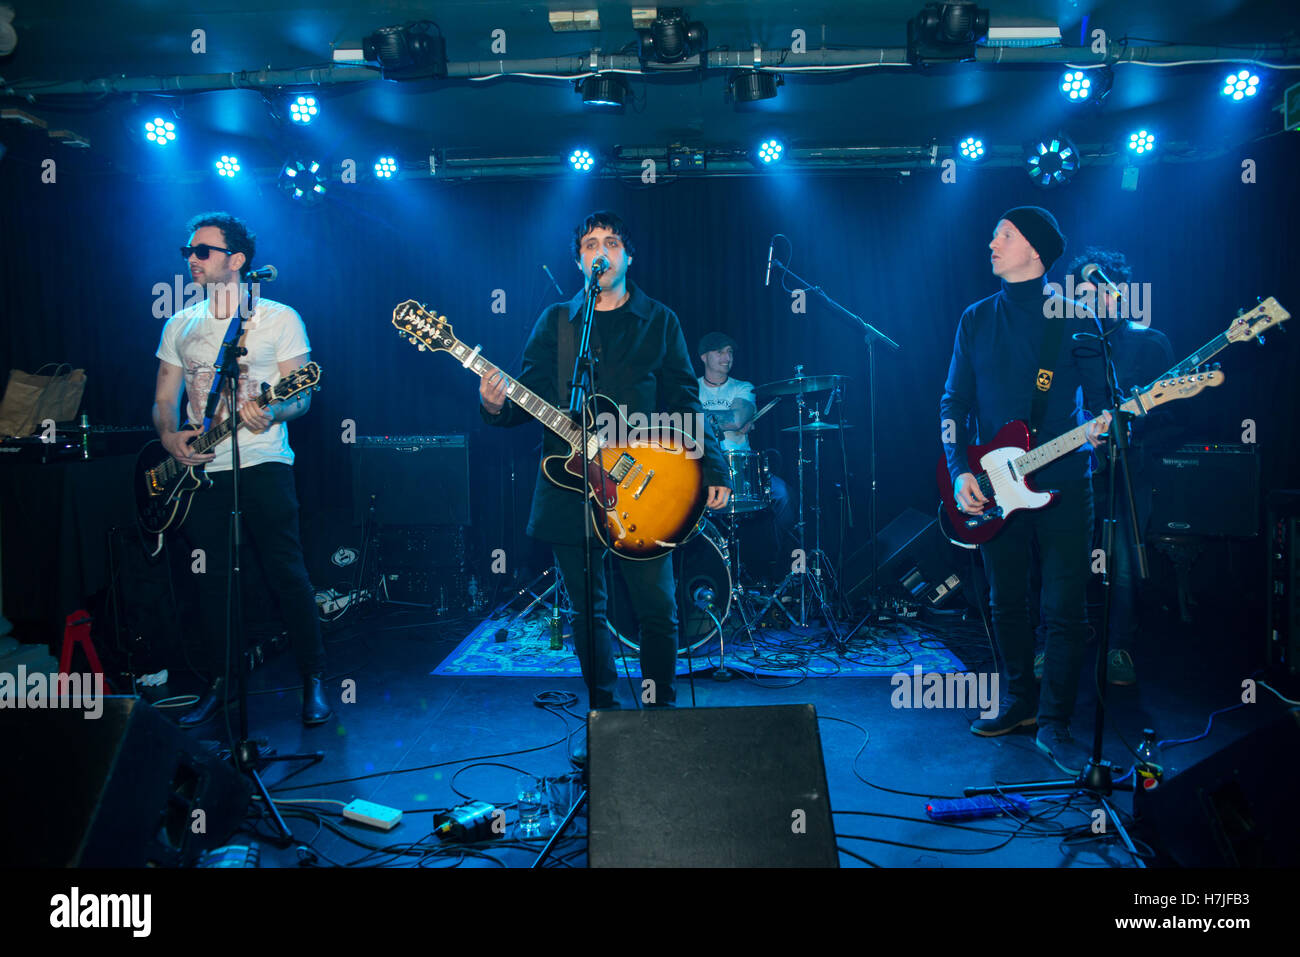 London, UK. 05th Nov, 2016. Indie rock band Alias Kid perform at Water Rats for This Feeling. The Mancunian band is comprised of Maz Behdjet (Vocals, Guitar), Sean O'Donnell (Guitar, Vocals), Nick Repton (Bass guitar), James Sweeney (Lead Guitar, Backing Vocals) and Colin Ward (Drums). Credit:  Alberto Pezzali/Pacific Press/Alamy Live News Stock Photo